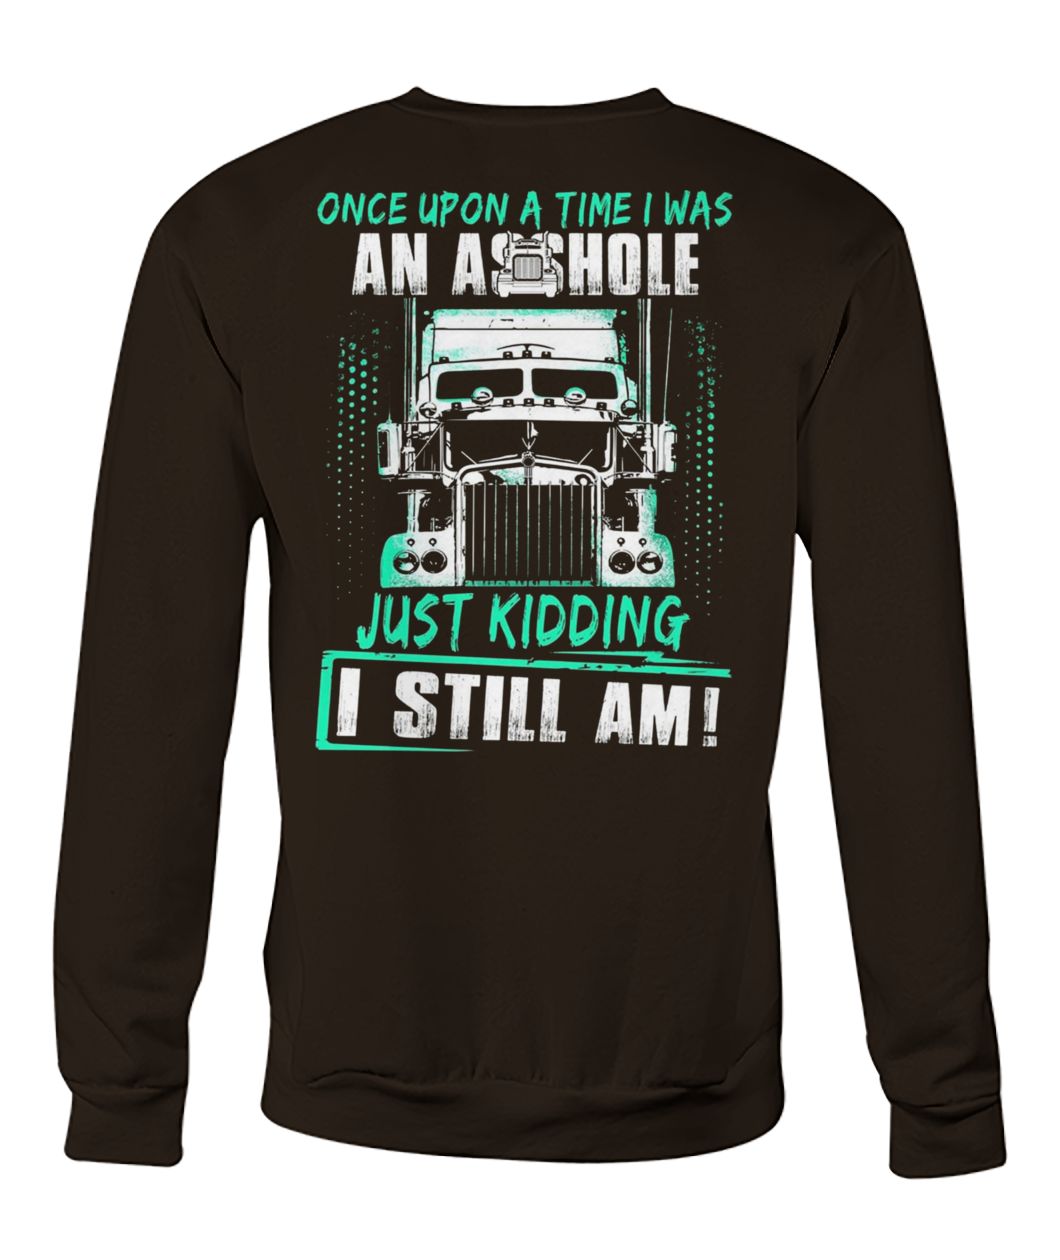 Trucker once upon a time I was an asshole just kidding I still am crew neck sweatshirt